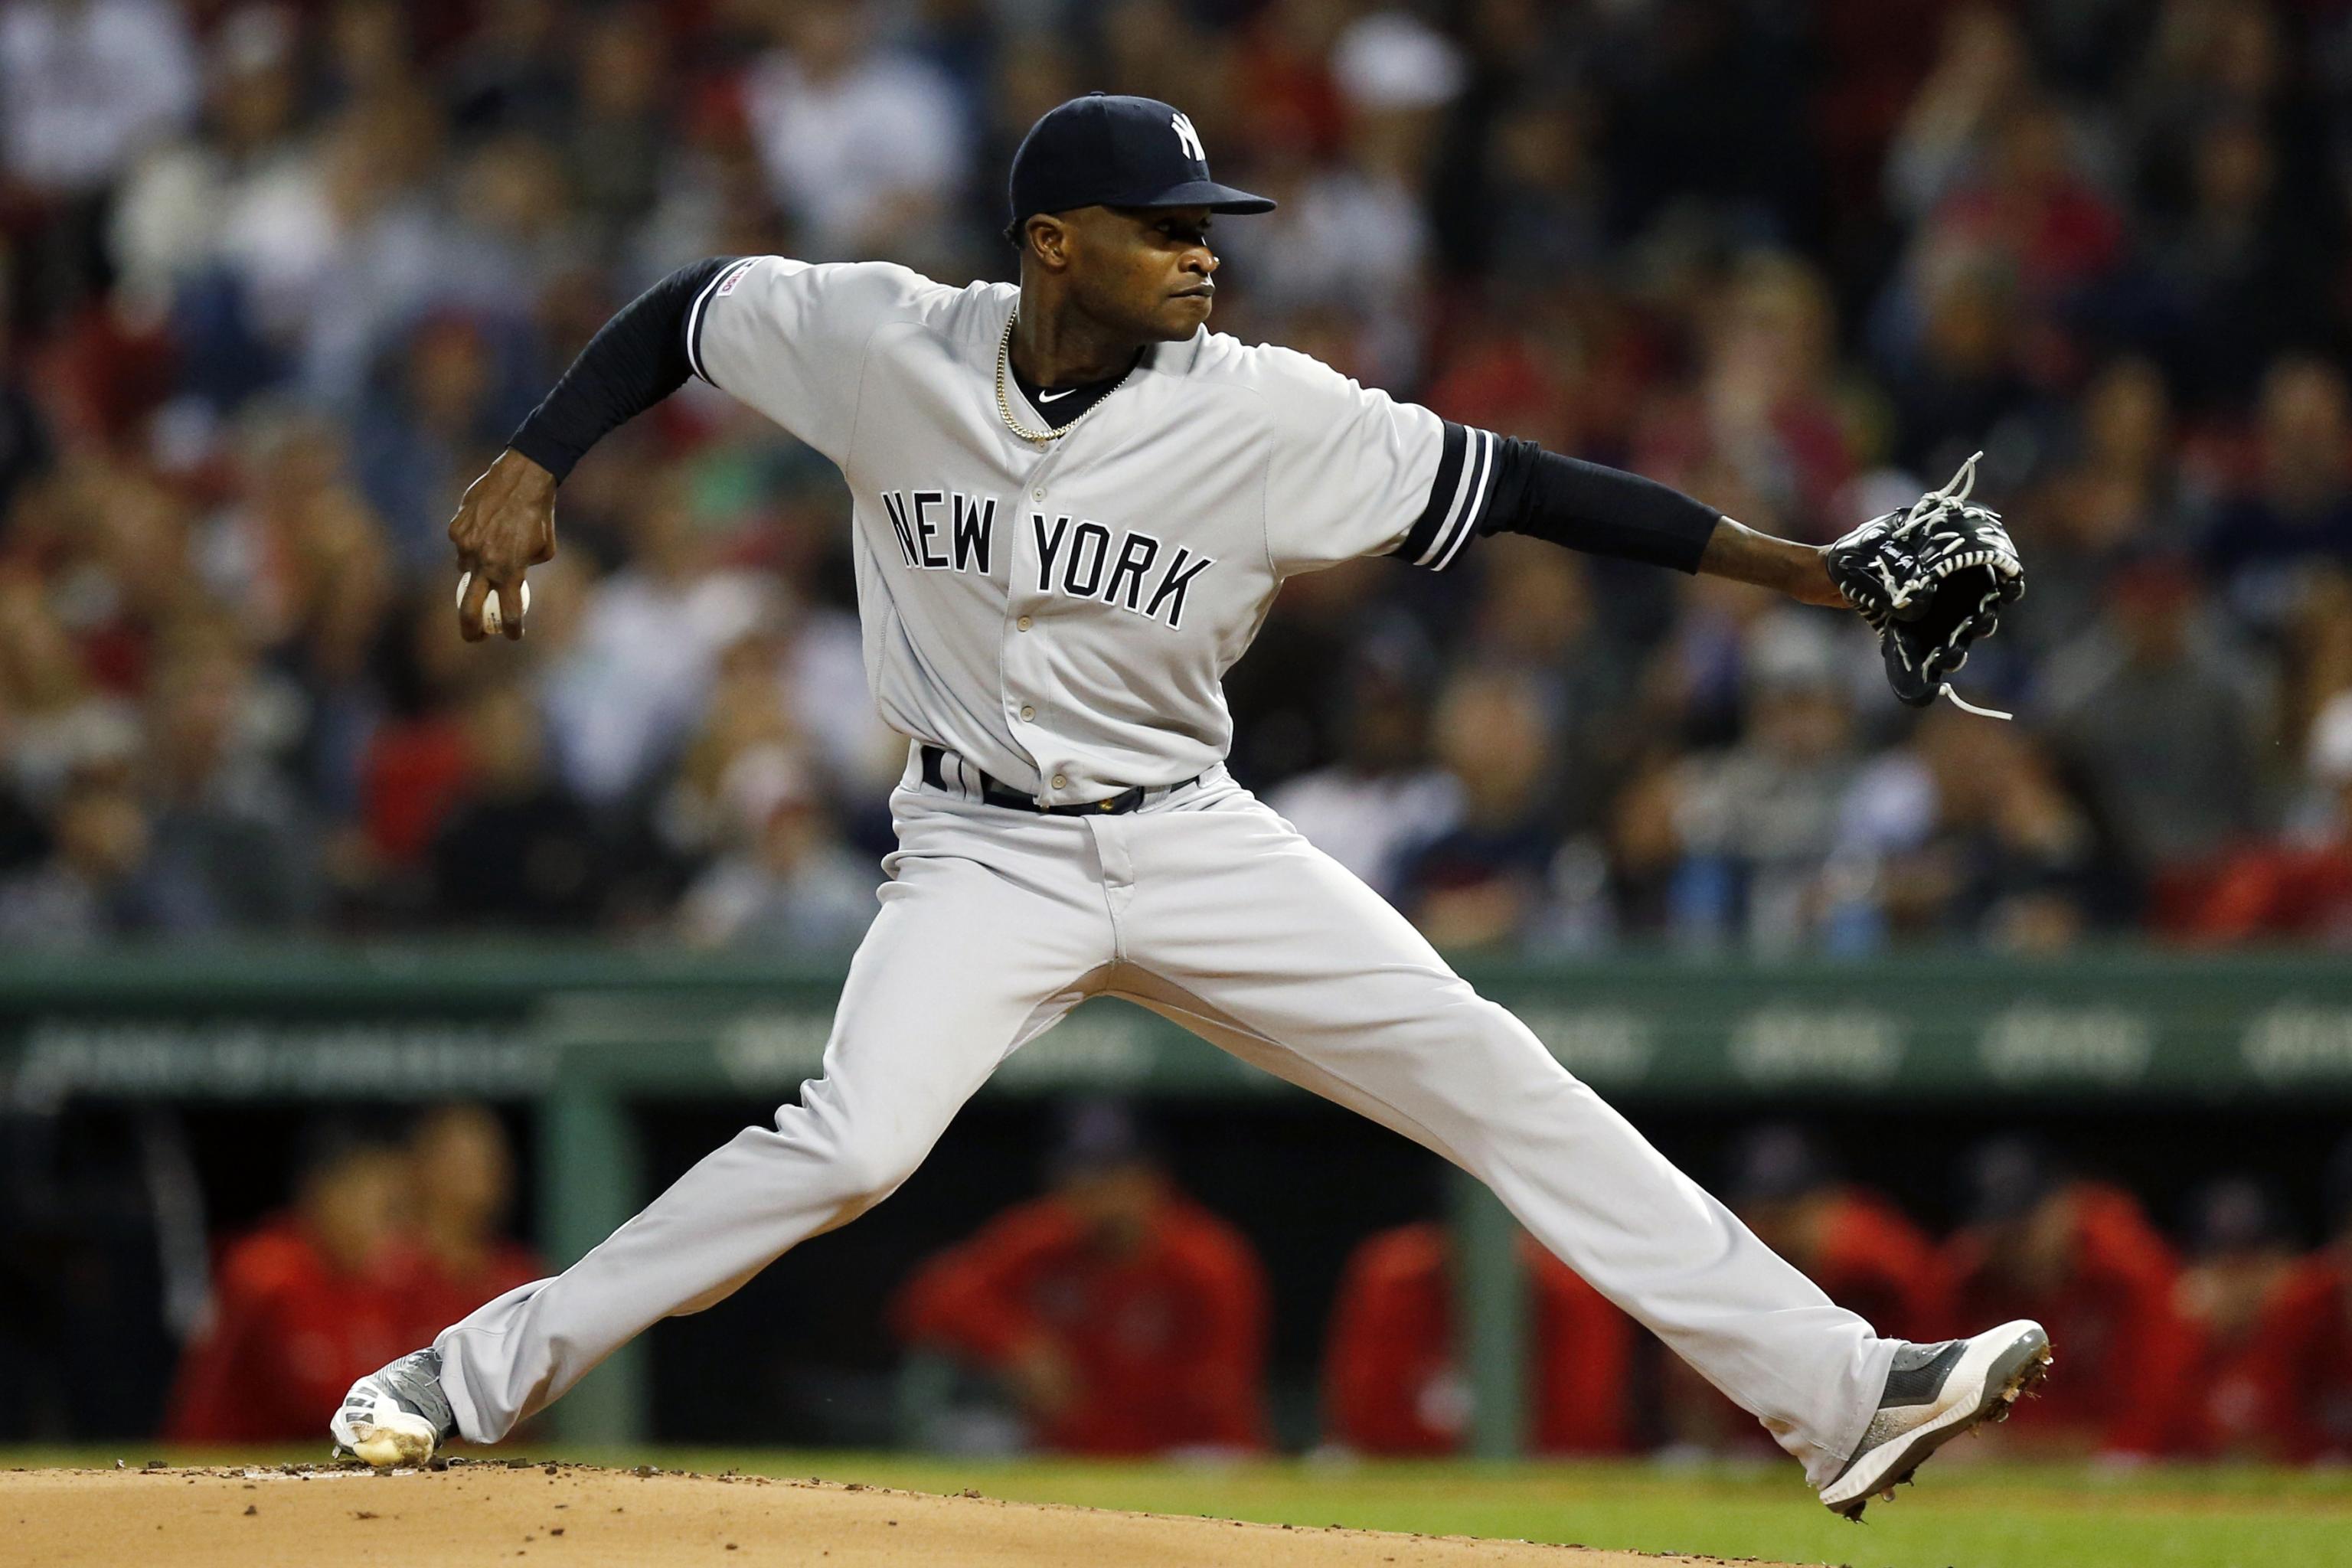 Domingo German has gone from afterthought to legitimate Yankees